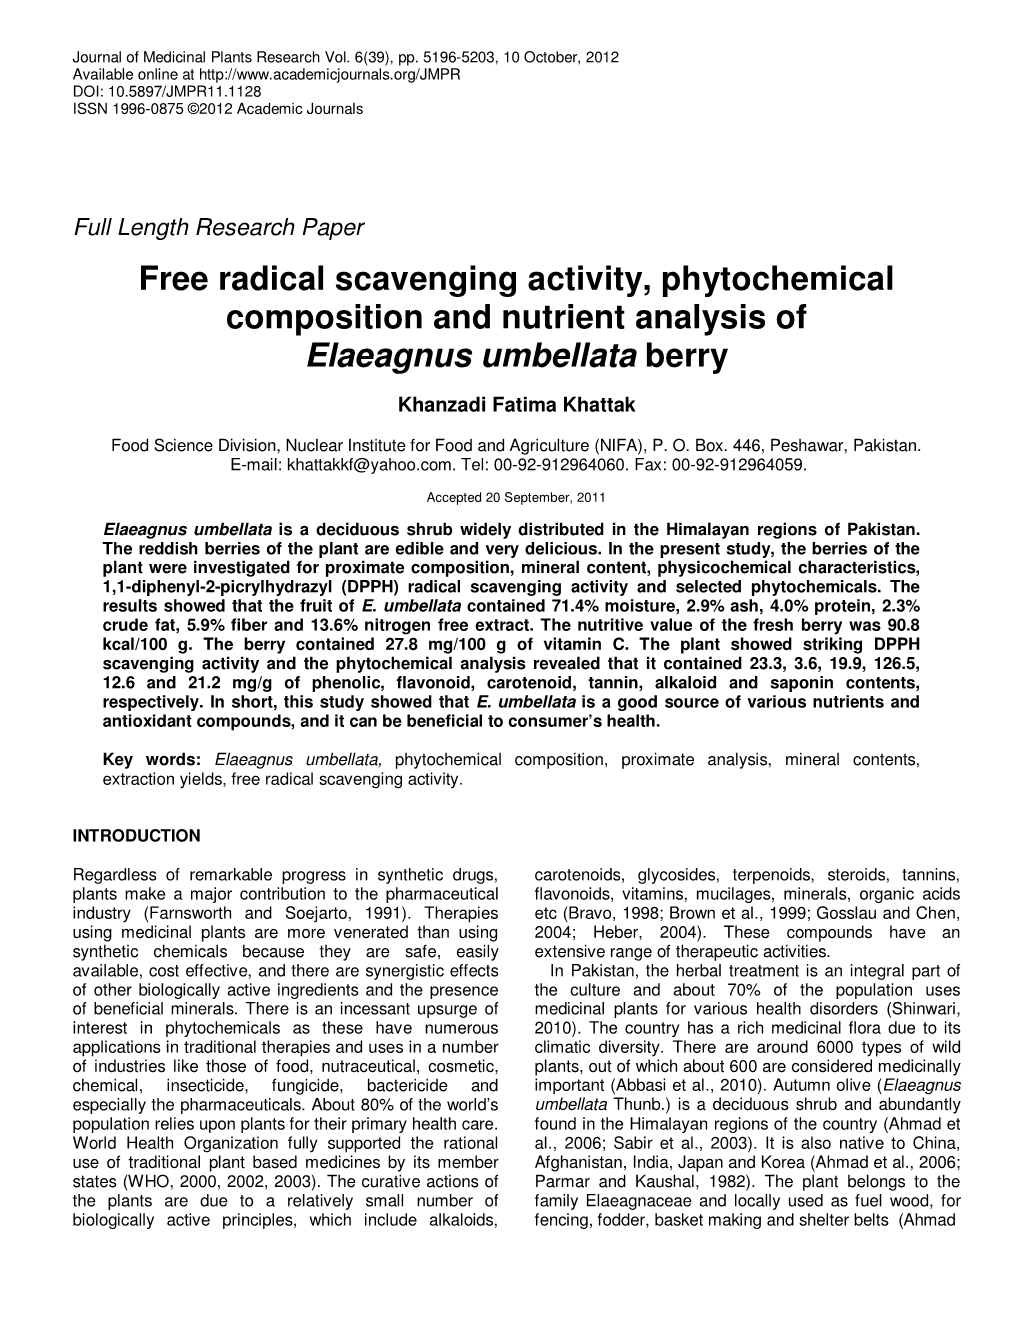 Free Radical Scavenging Activity, Phytochemical Composition and Nutrient Analysis of Elaeagnus Umbellata Berry